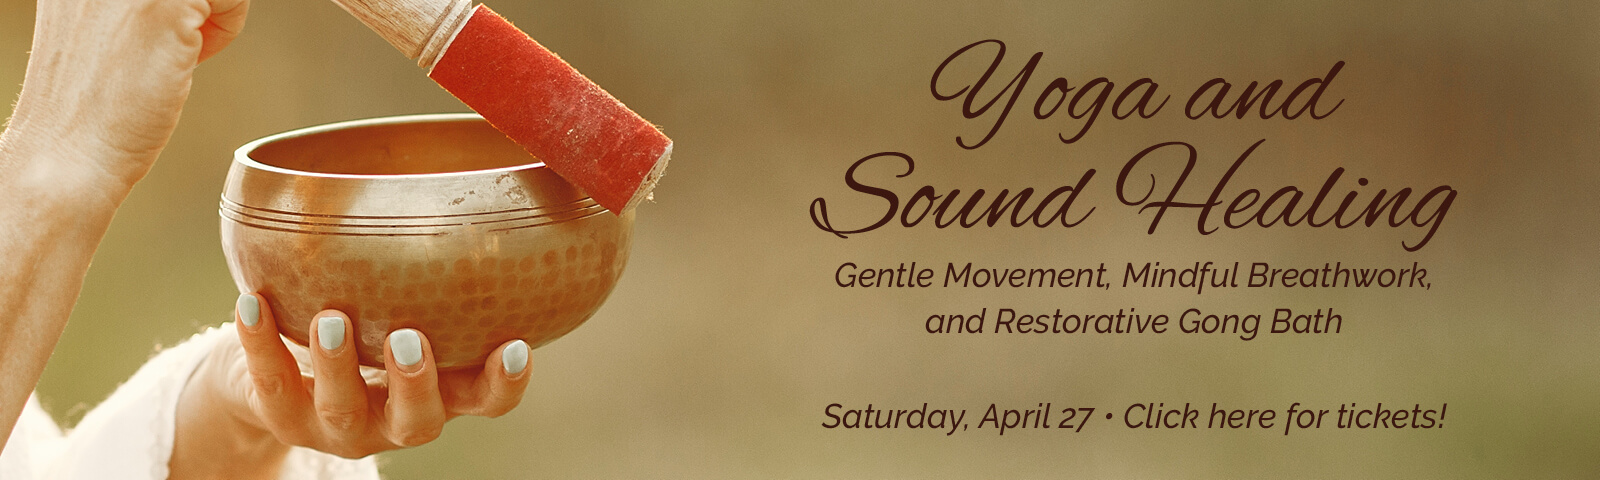 Yoga and Sound Healing: Gentle Movement, Mindful Breathwork, and Restorative Gong Bath. Saturday, April 27 — Click here for tickets!